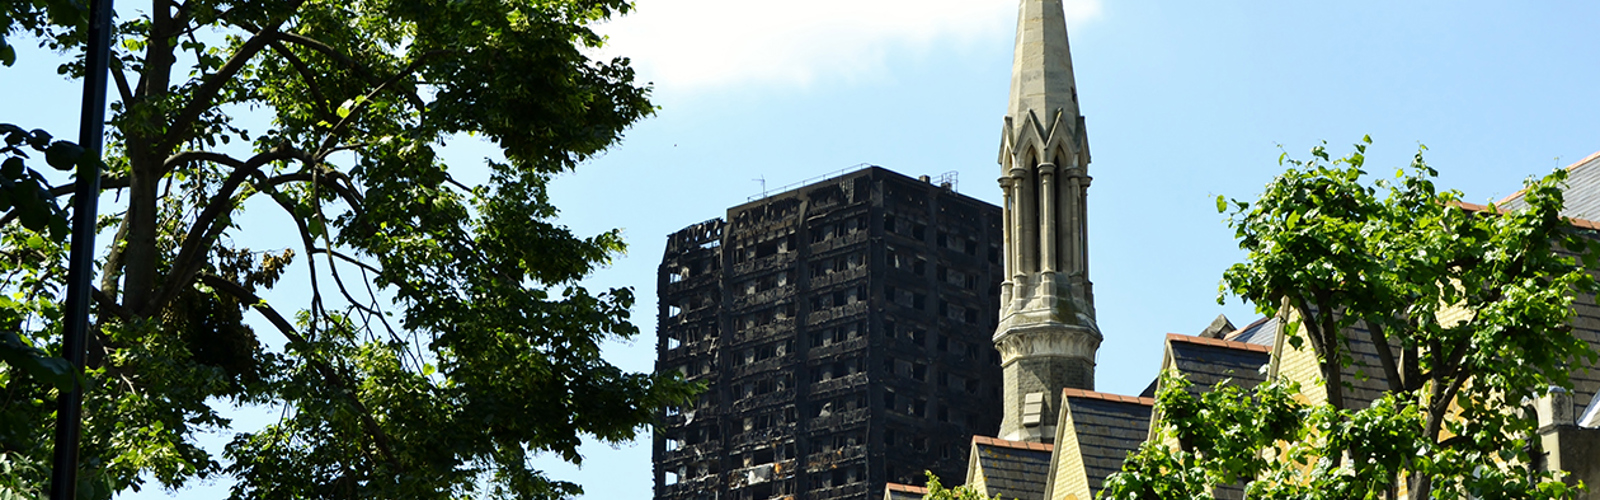 A blackened Grenfell Tower soon after the fire